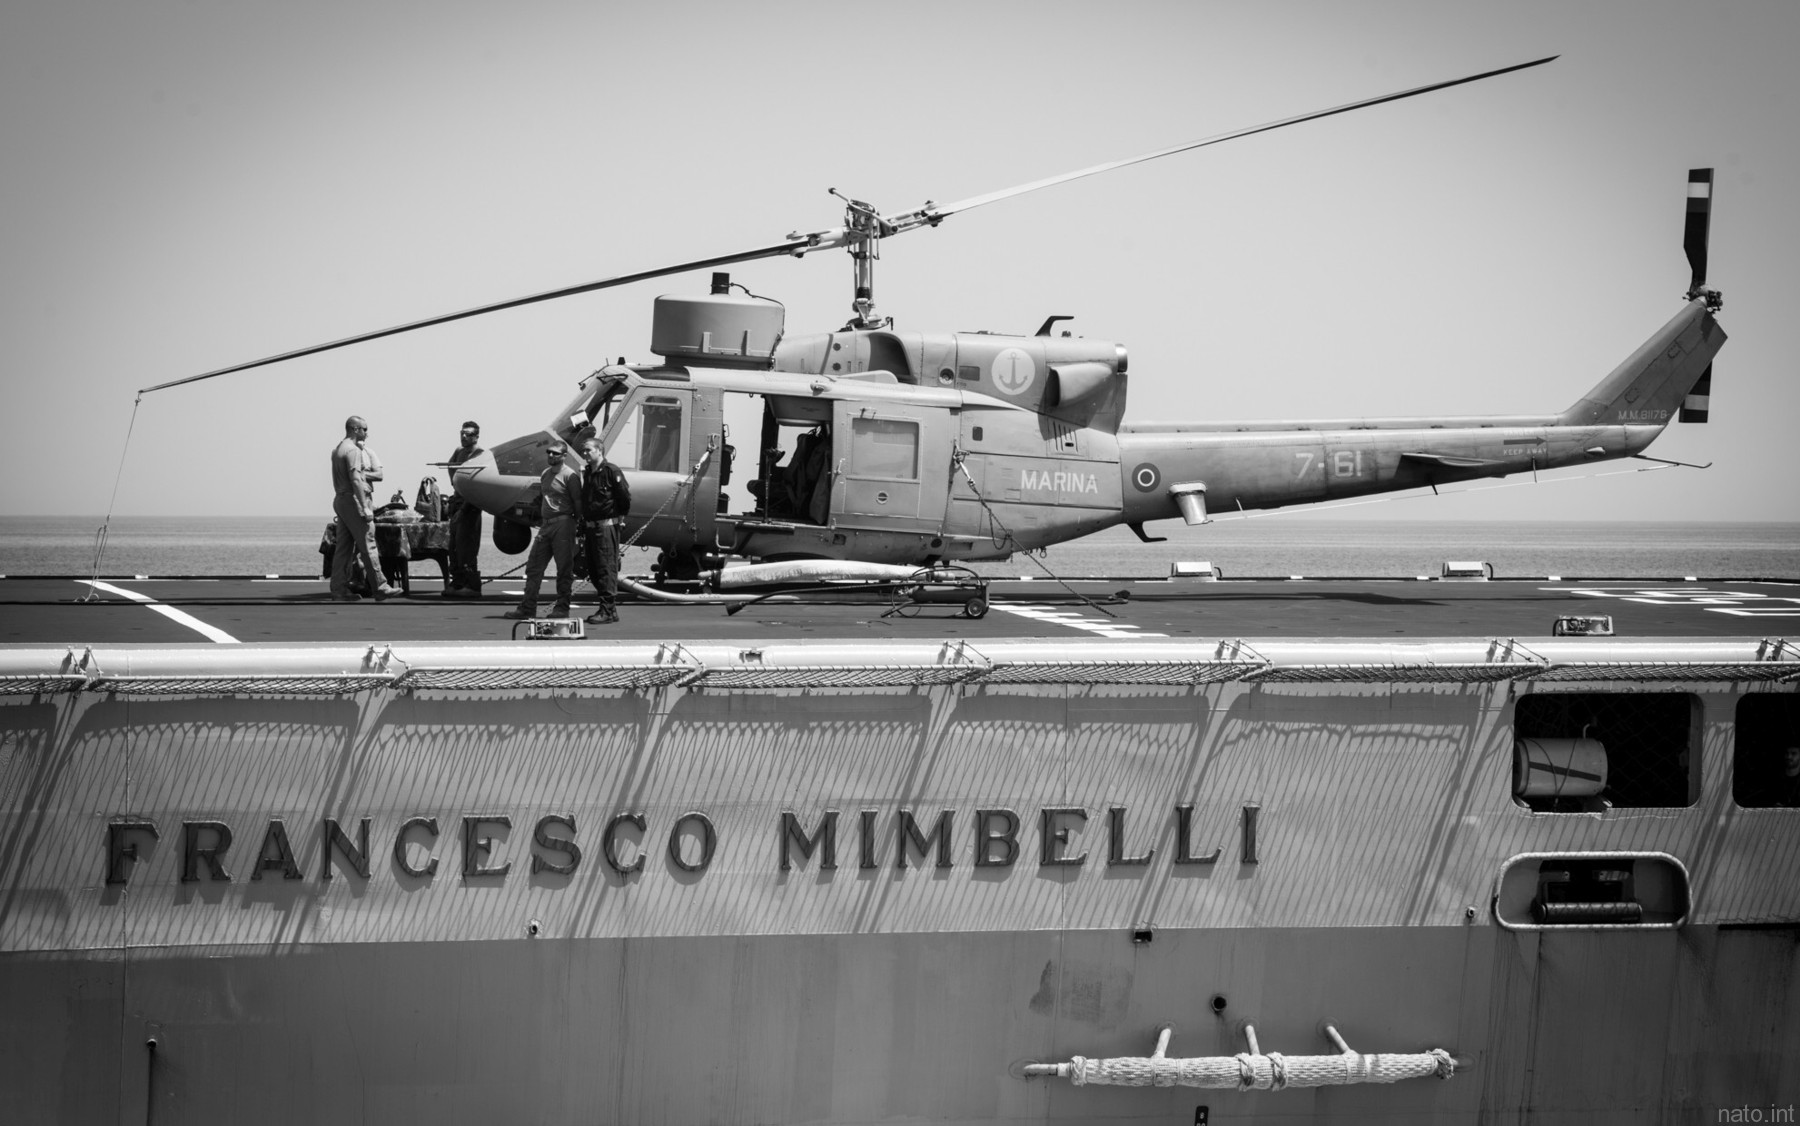 d-561 francesco mimbelli its nave guided missile destroyer ddg italian navy marina militare 38 ab212 asw helicopter